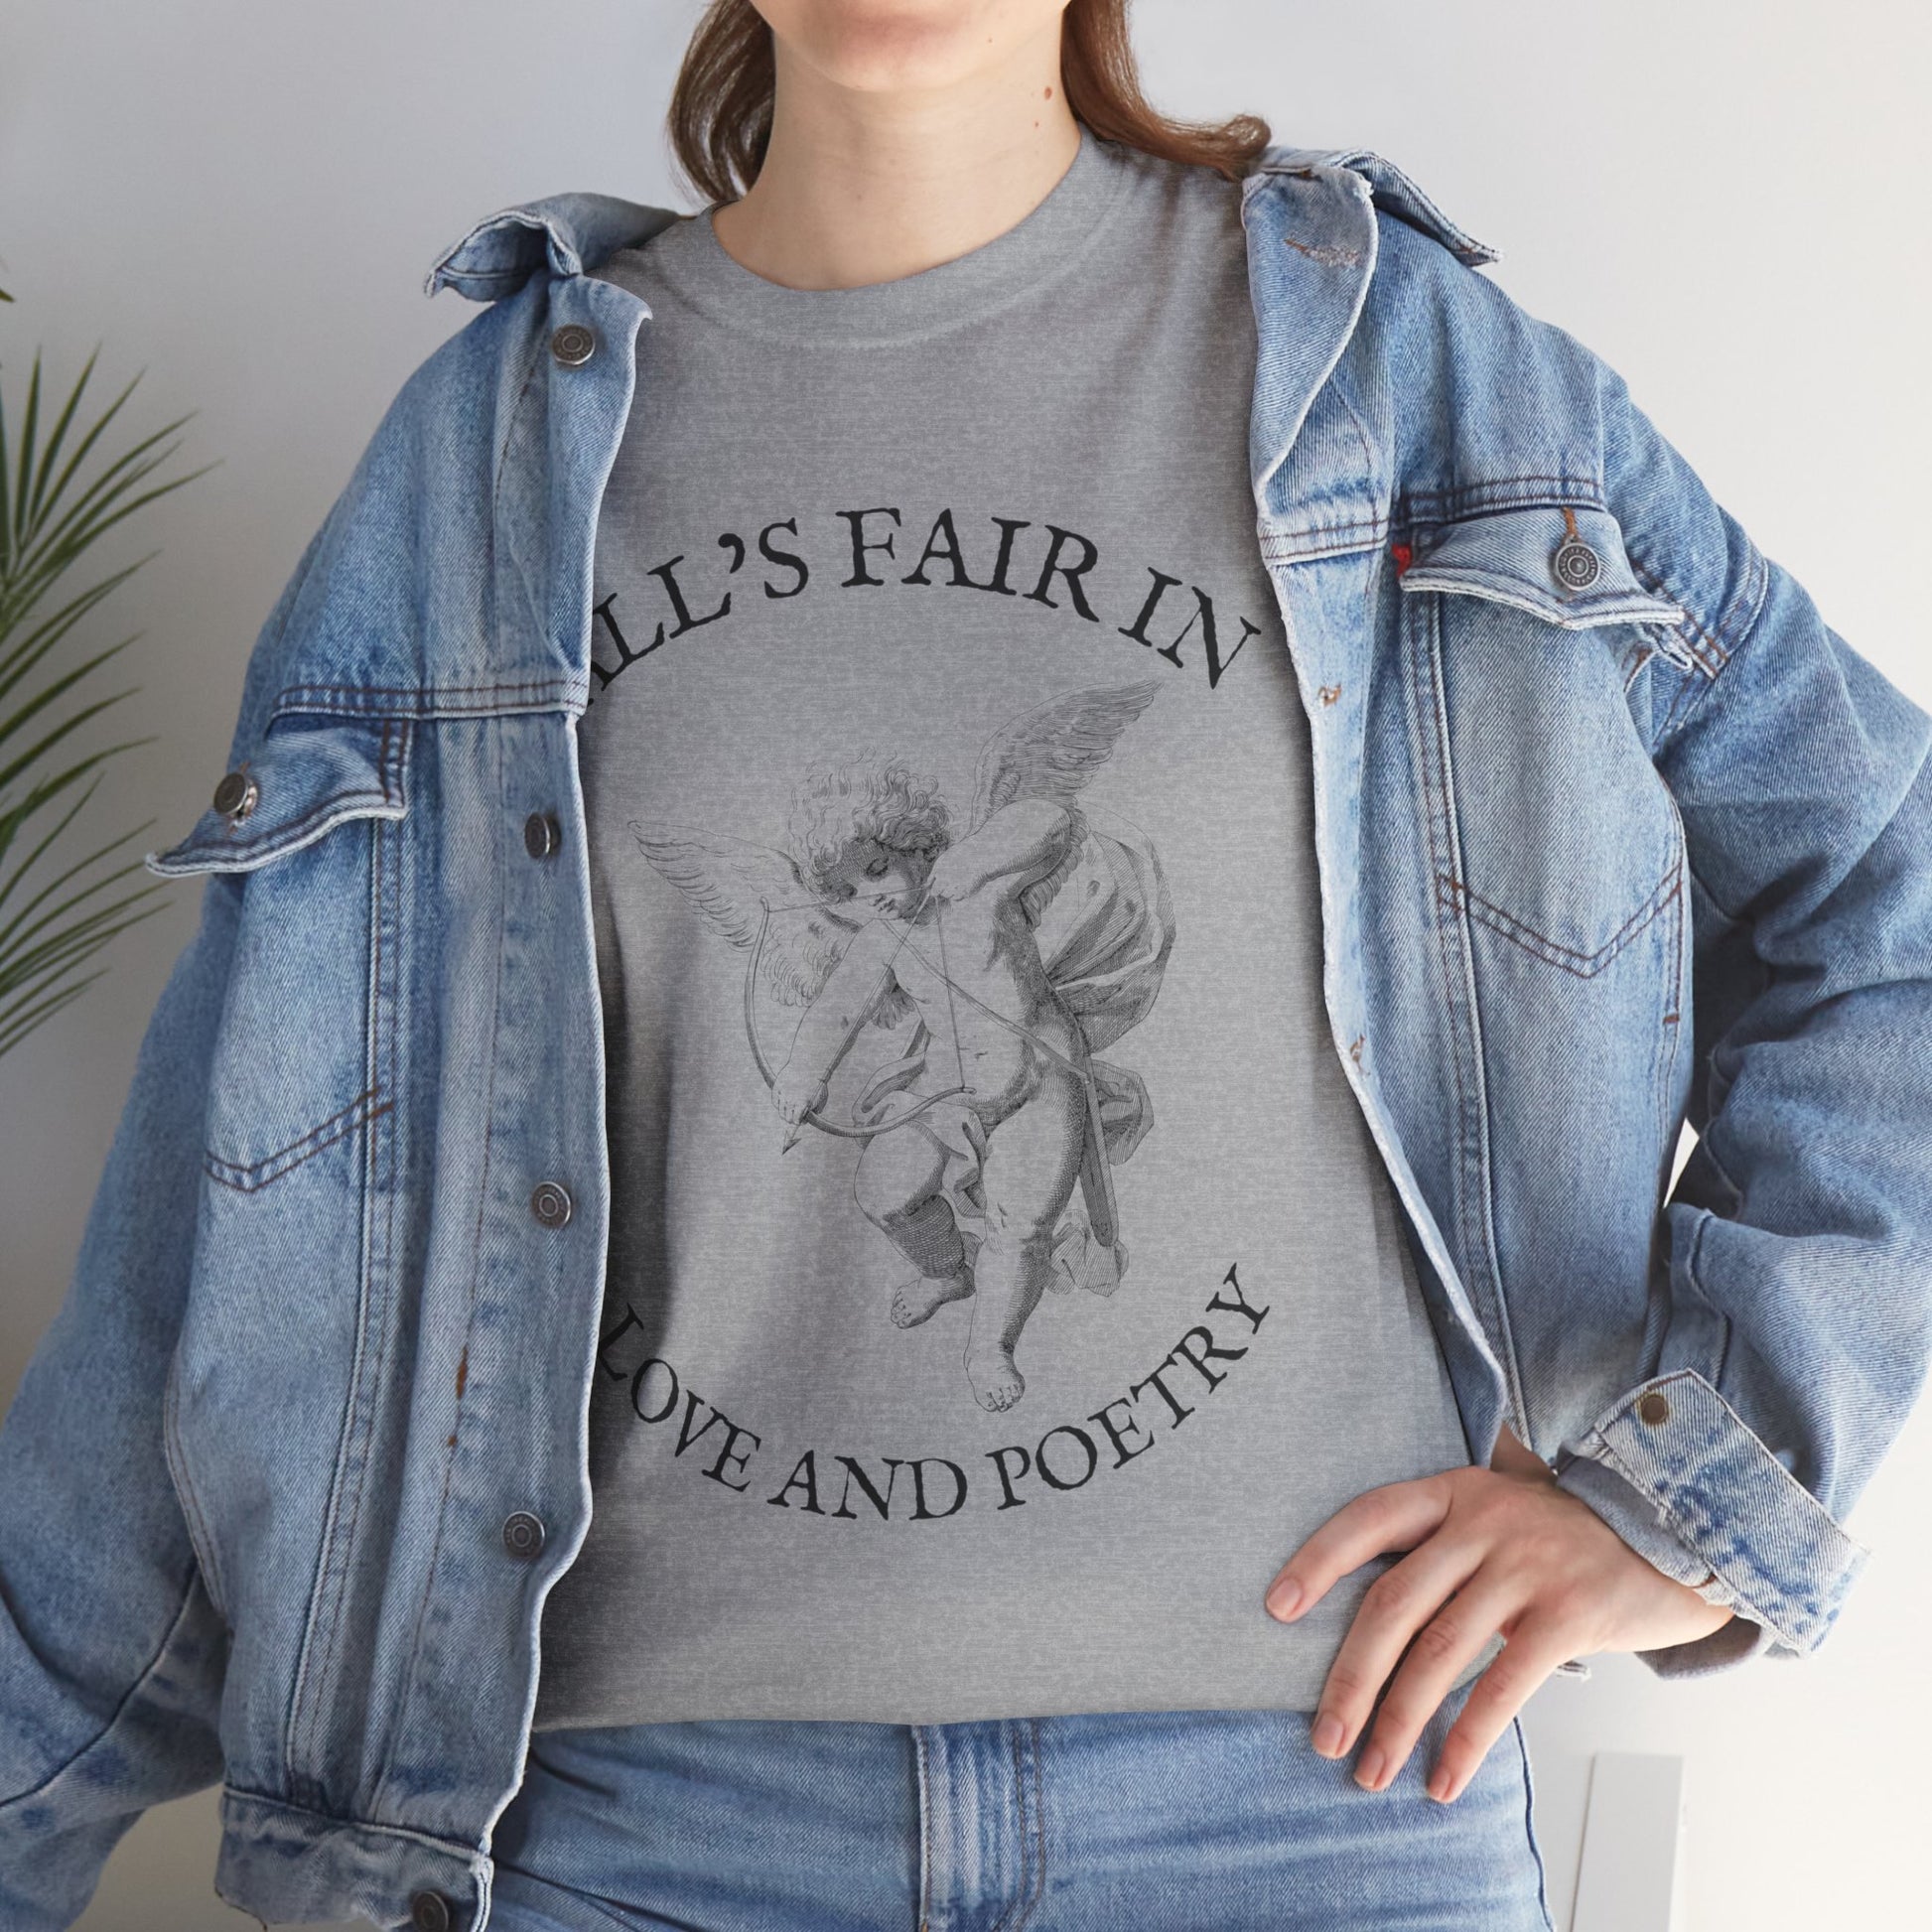 All's Fair in Love and Poetry T-Shirt Sport Grey